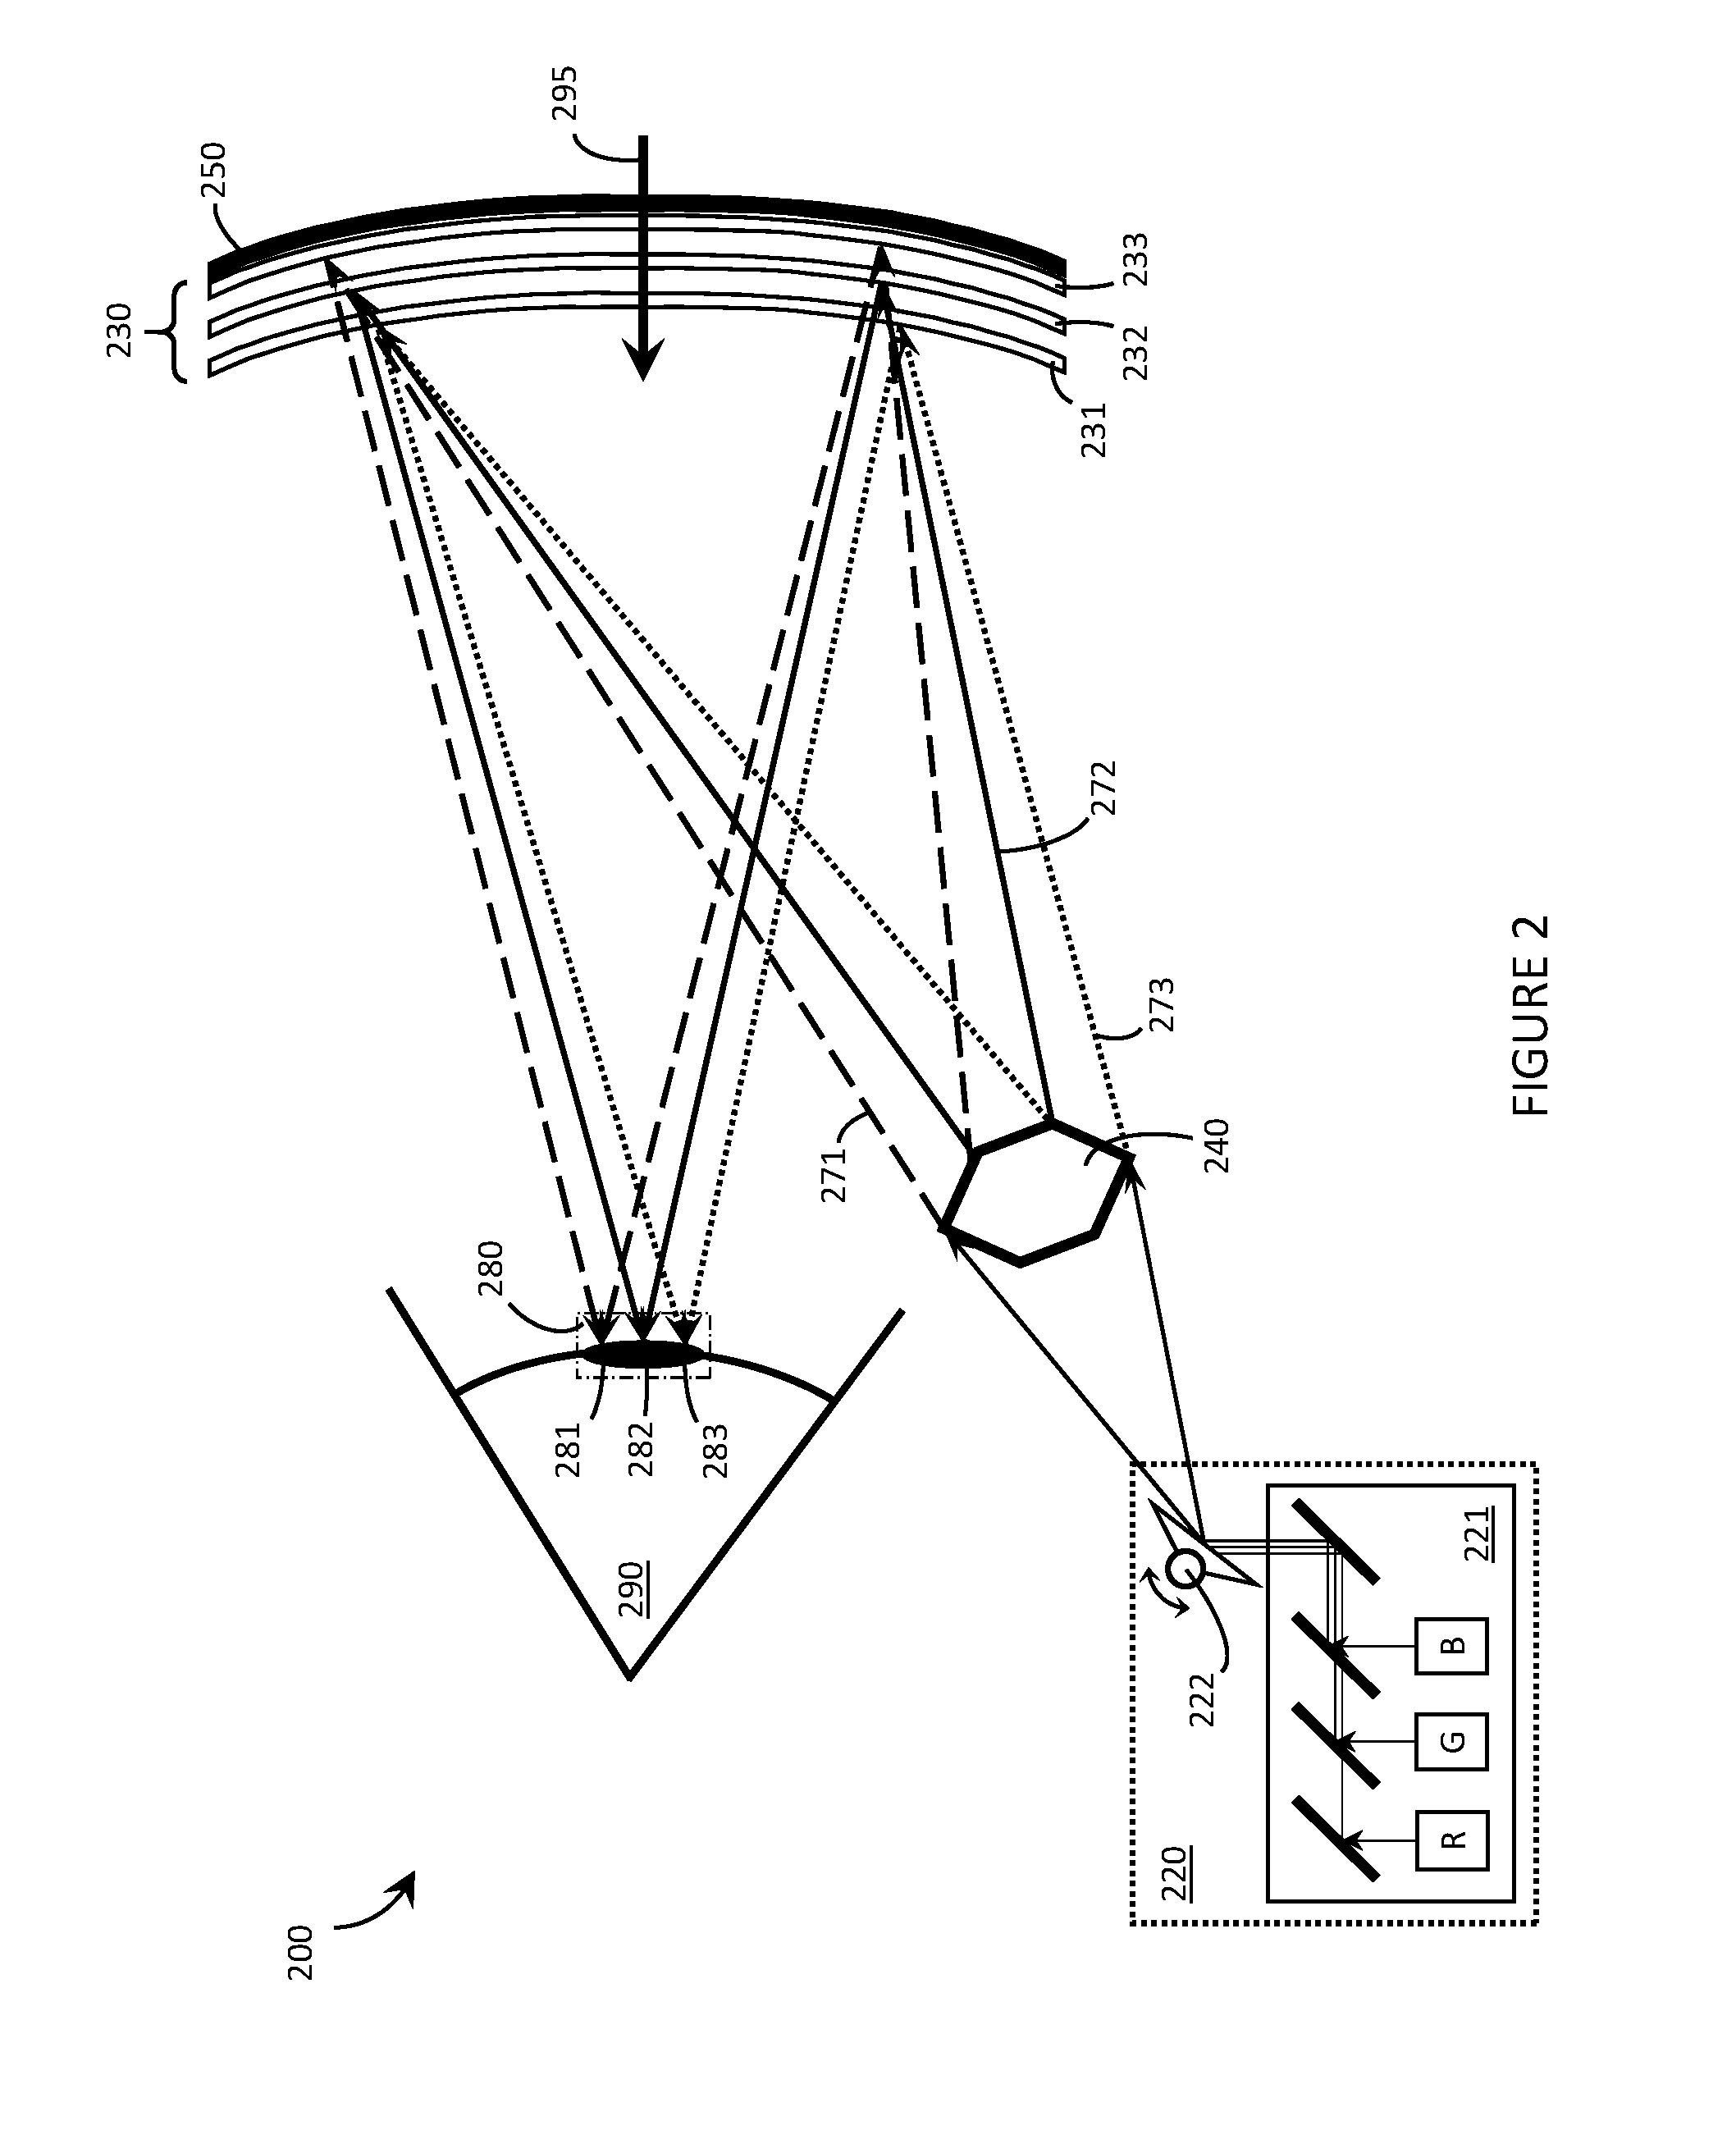 Systems, devices, and methods for angle- and wavelength-multiplexed holographic optical elements